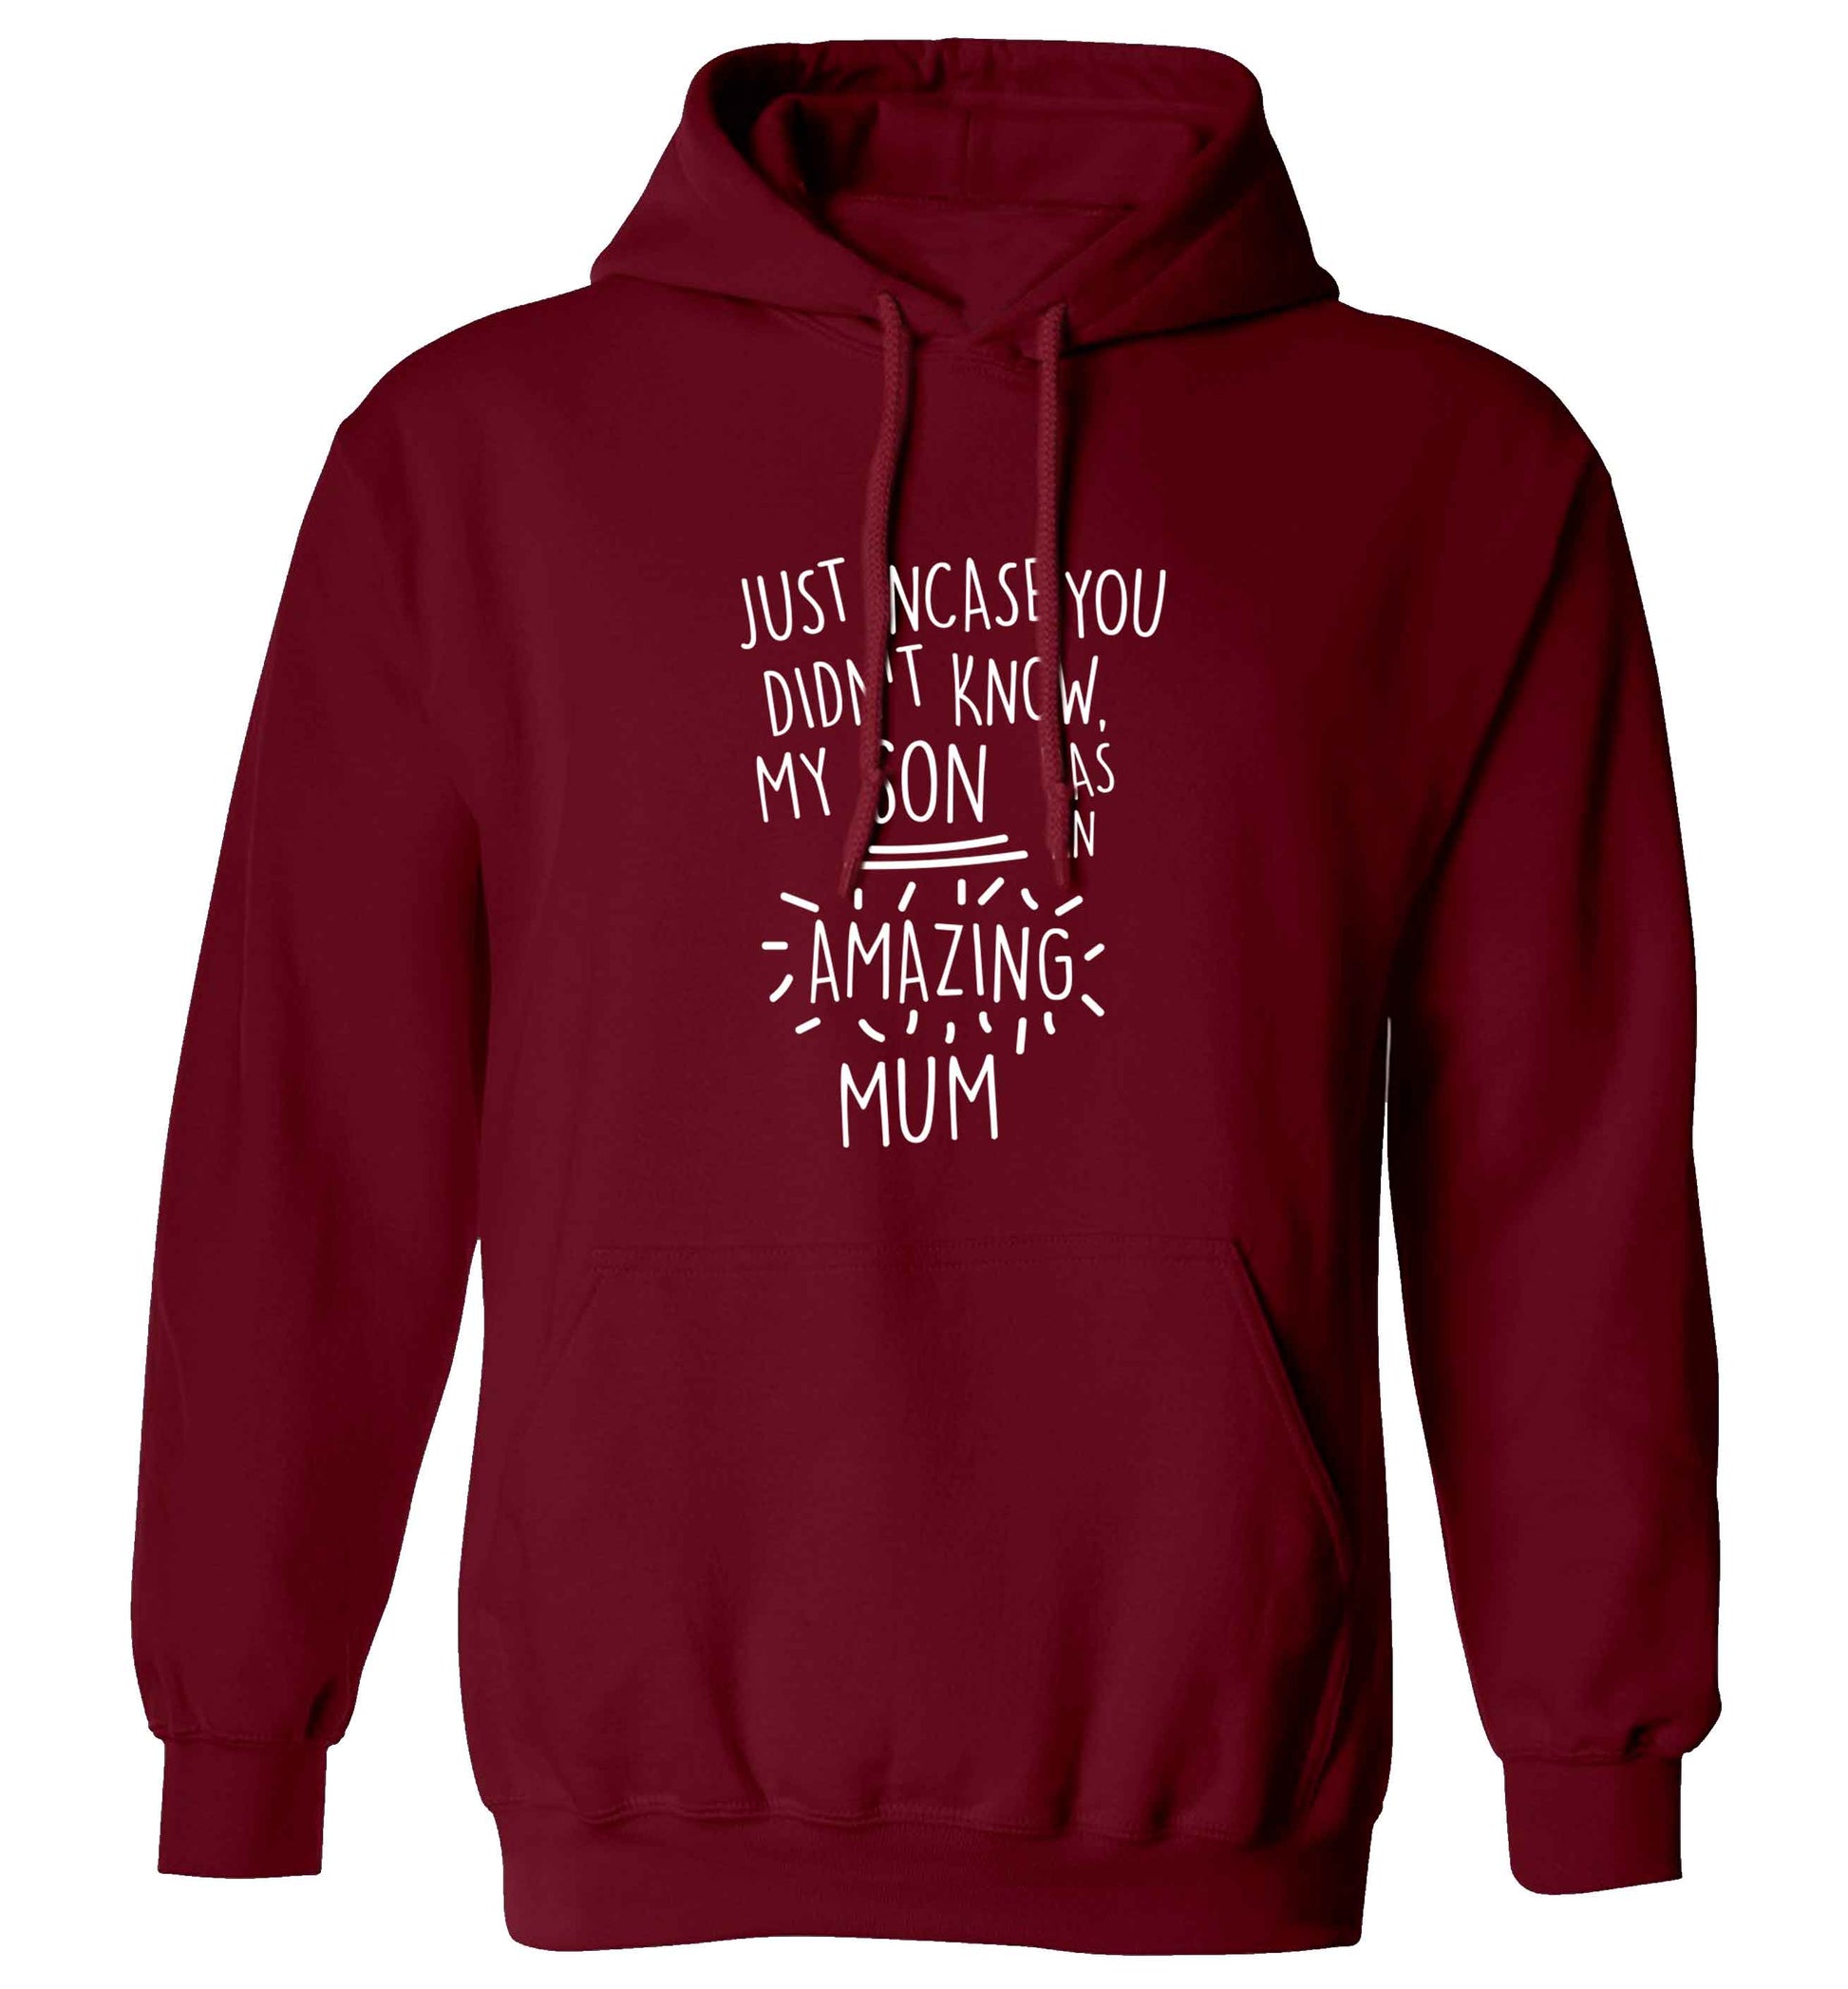 Just incase you didn't know my son has an amazing mum adults unisex maroon hoodie 2XL